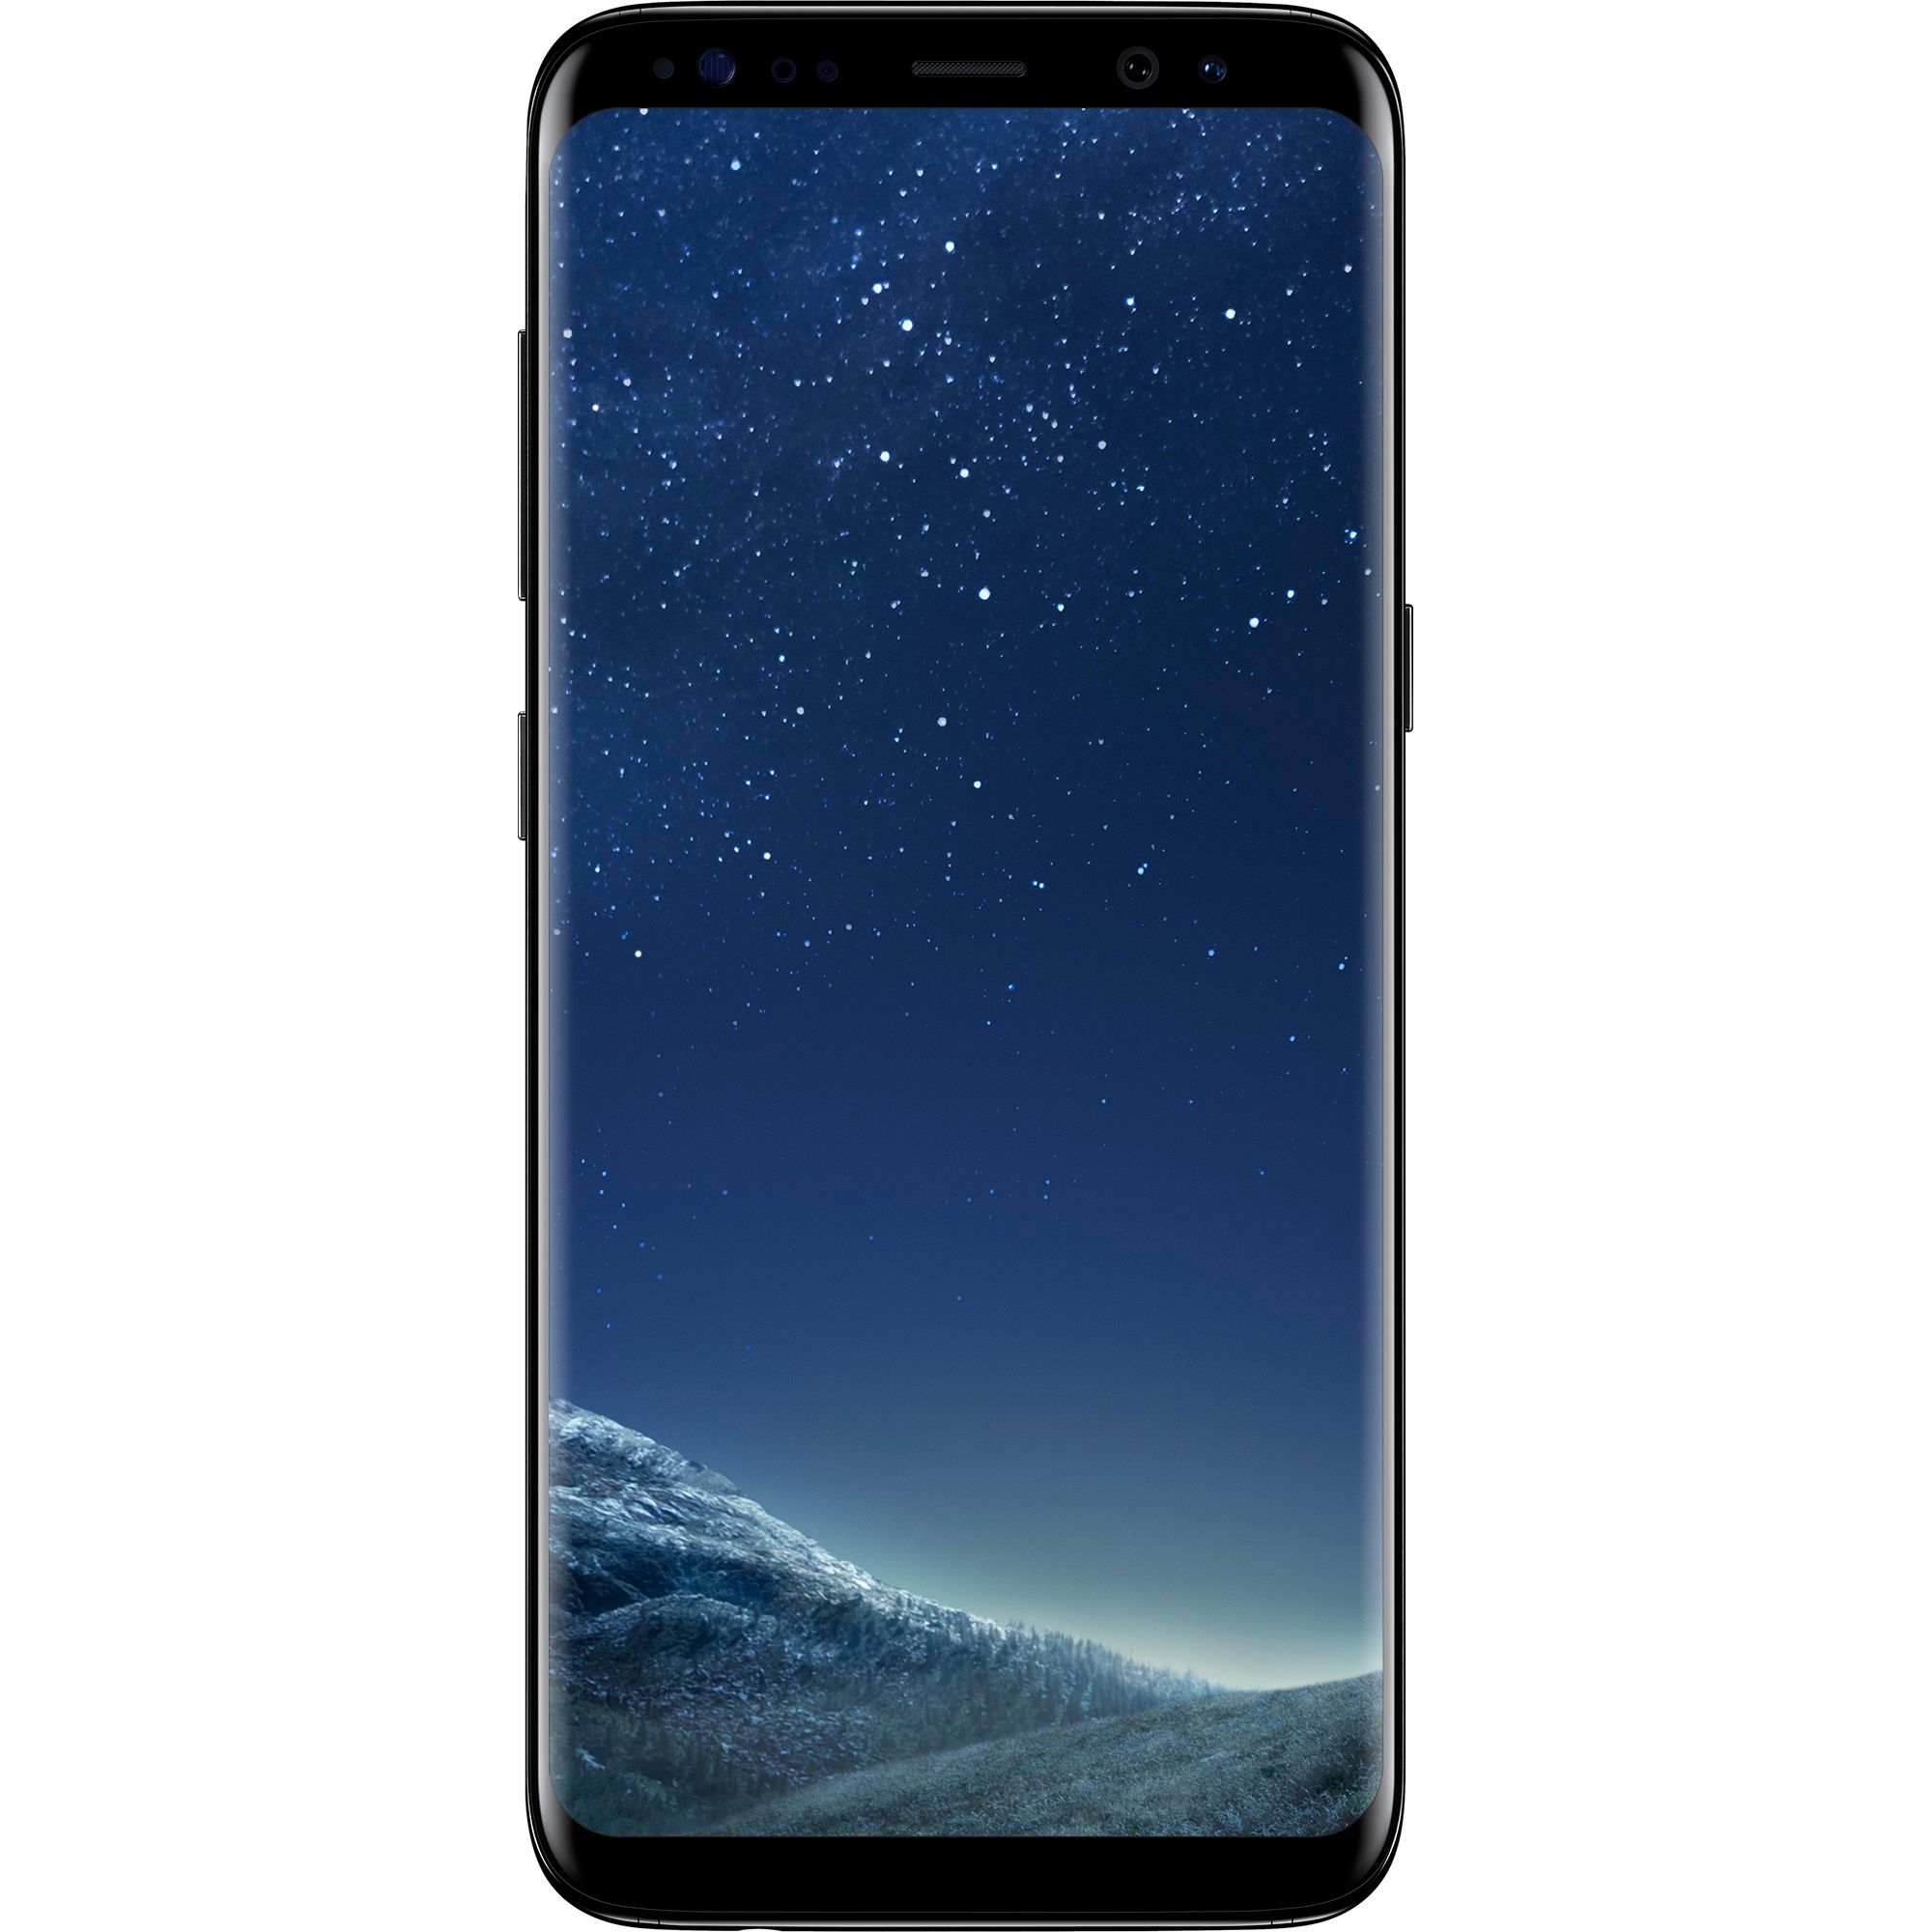 Canadian Samsung Galaxy S8 and S8 Plus receive their October security update